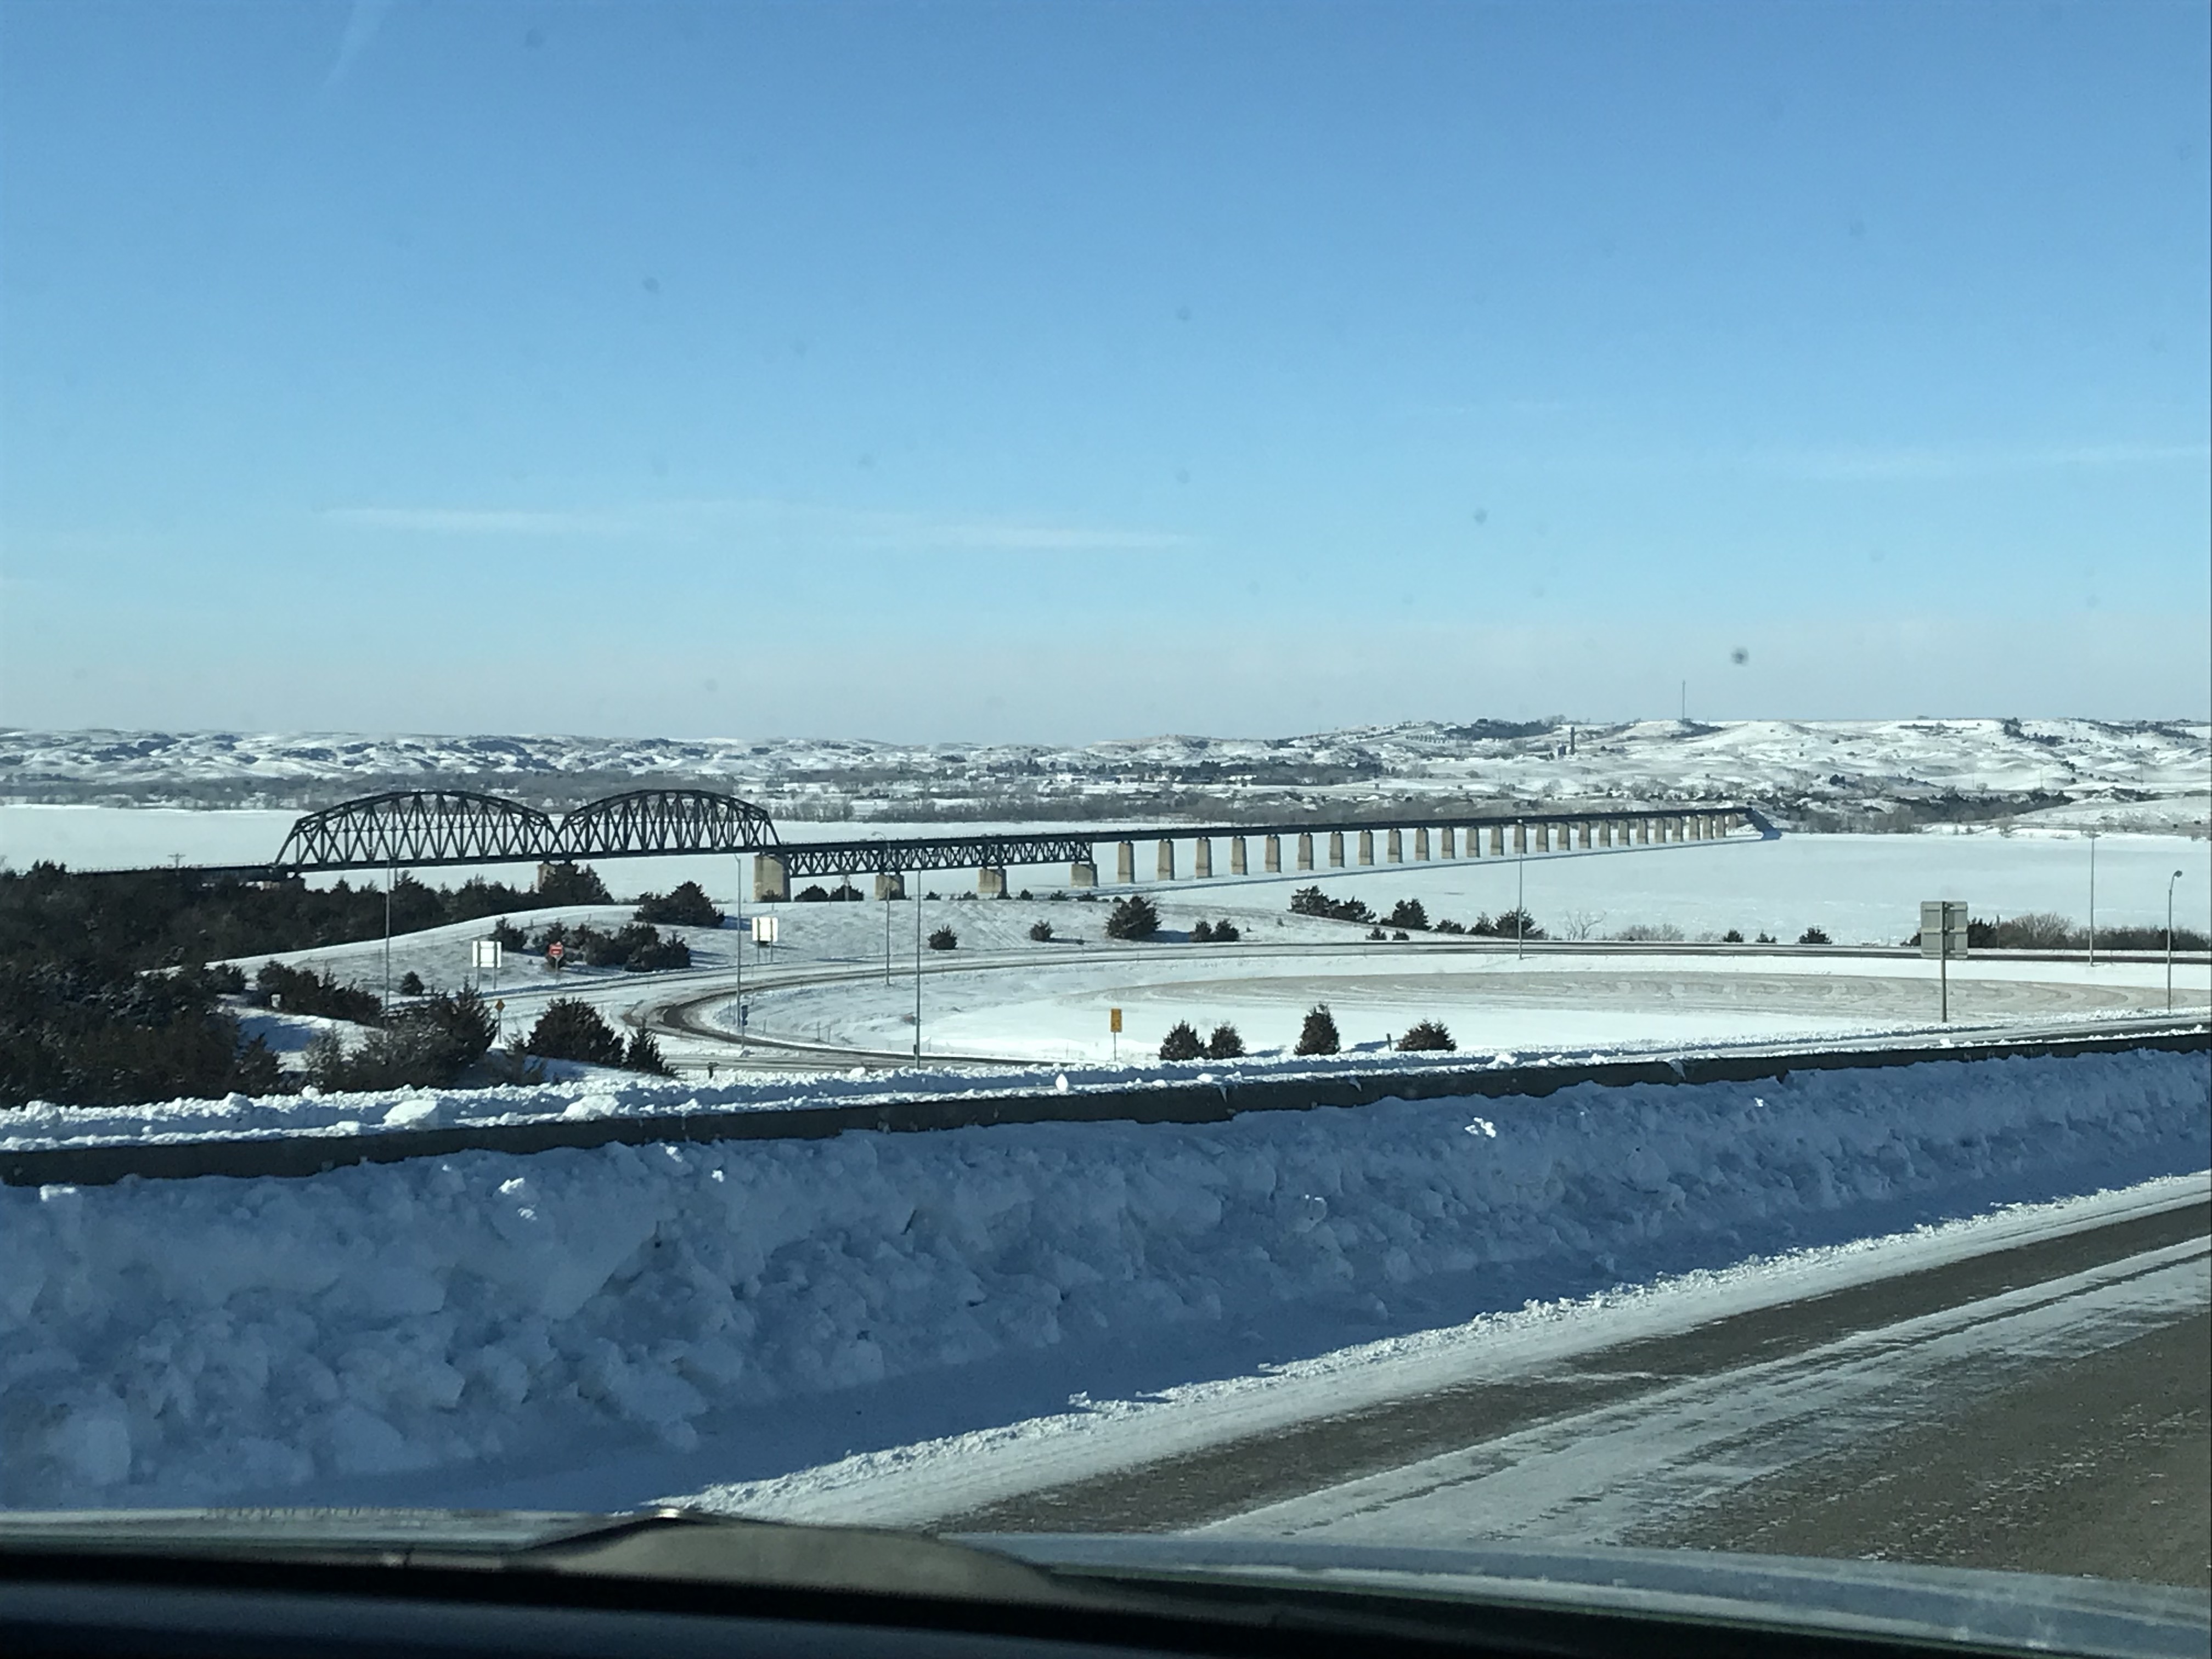 A snowy landscape and a long, railroad bridge over the ice-covered Missouri River